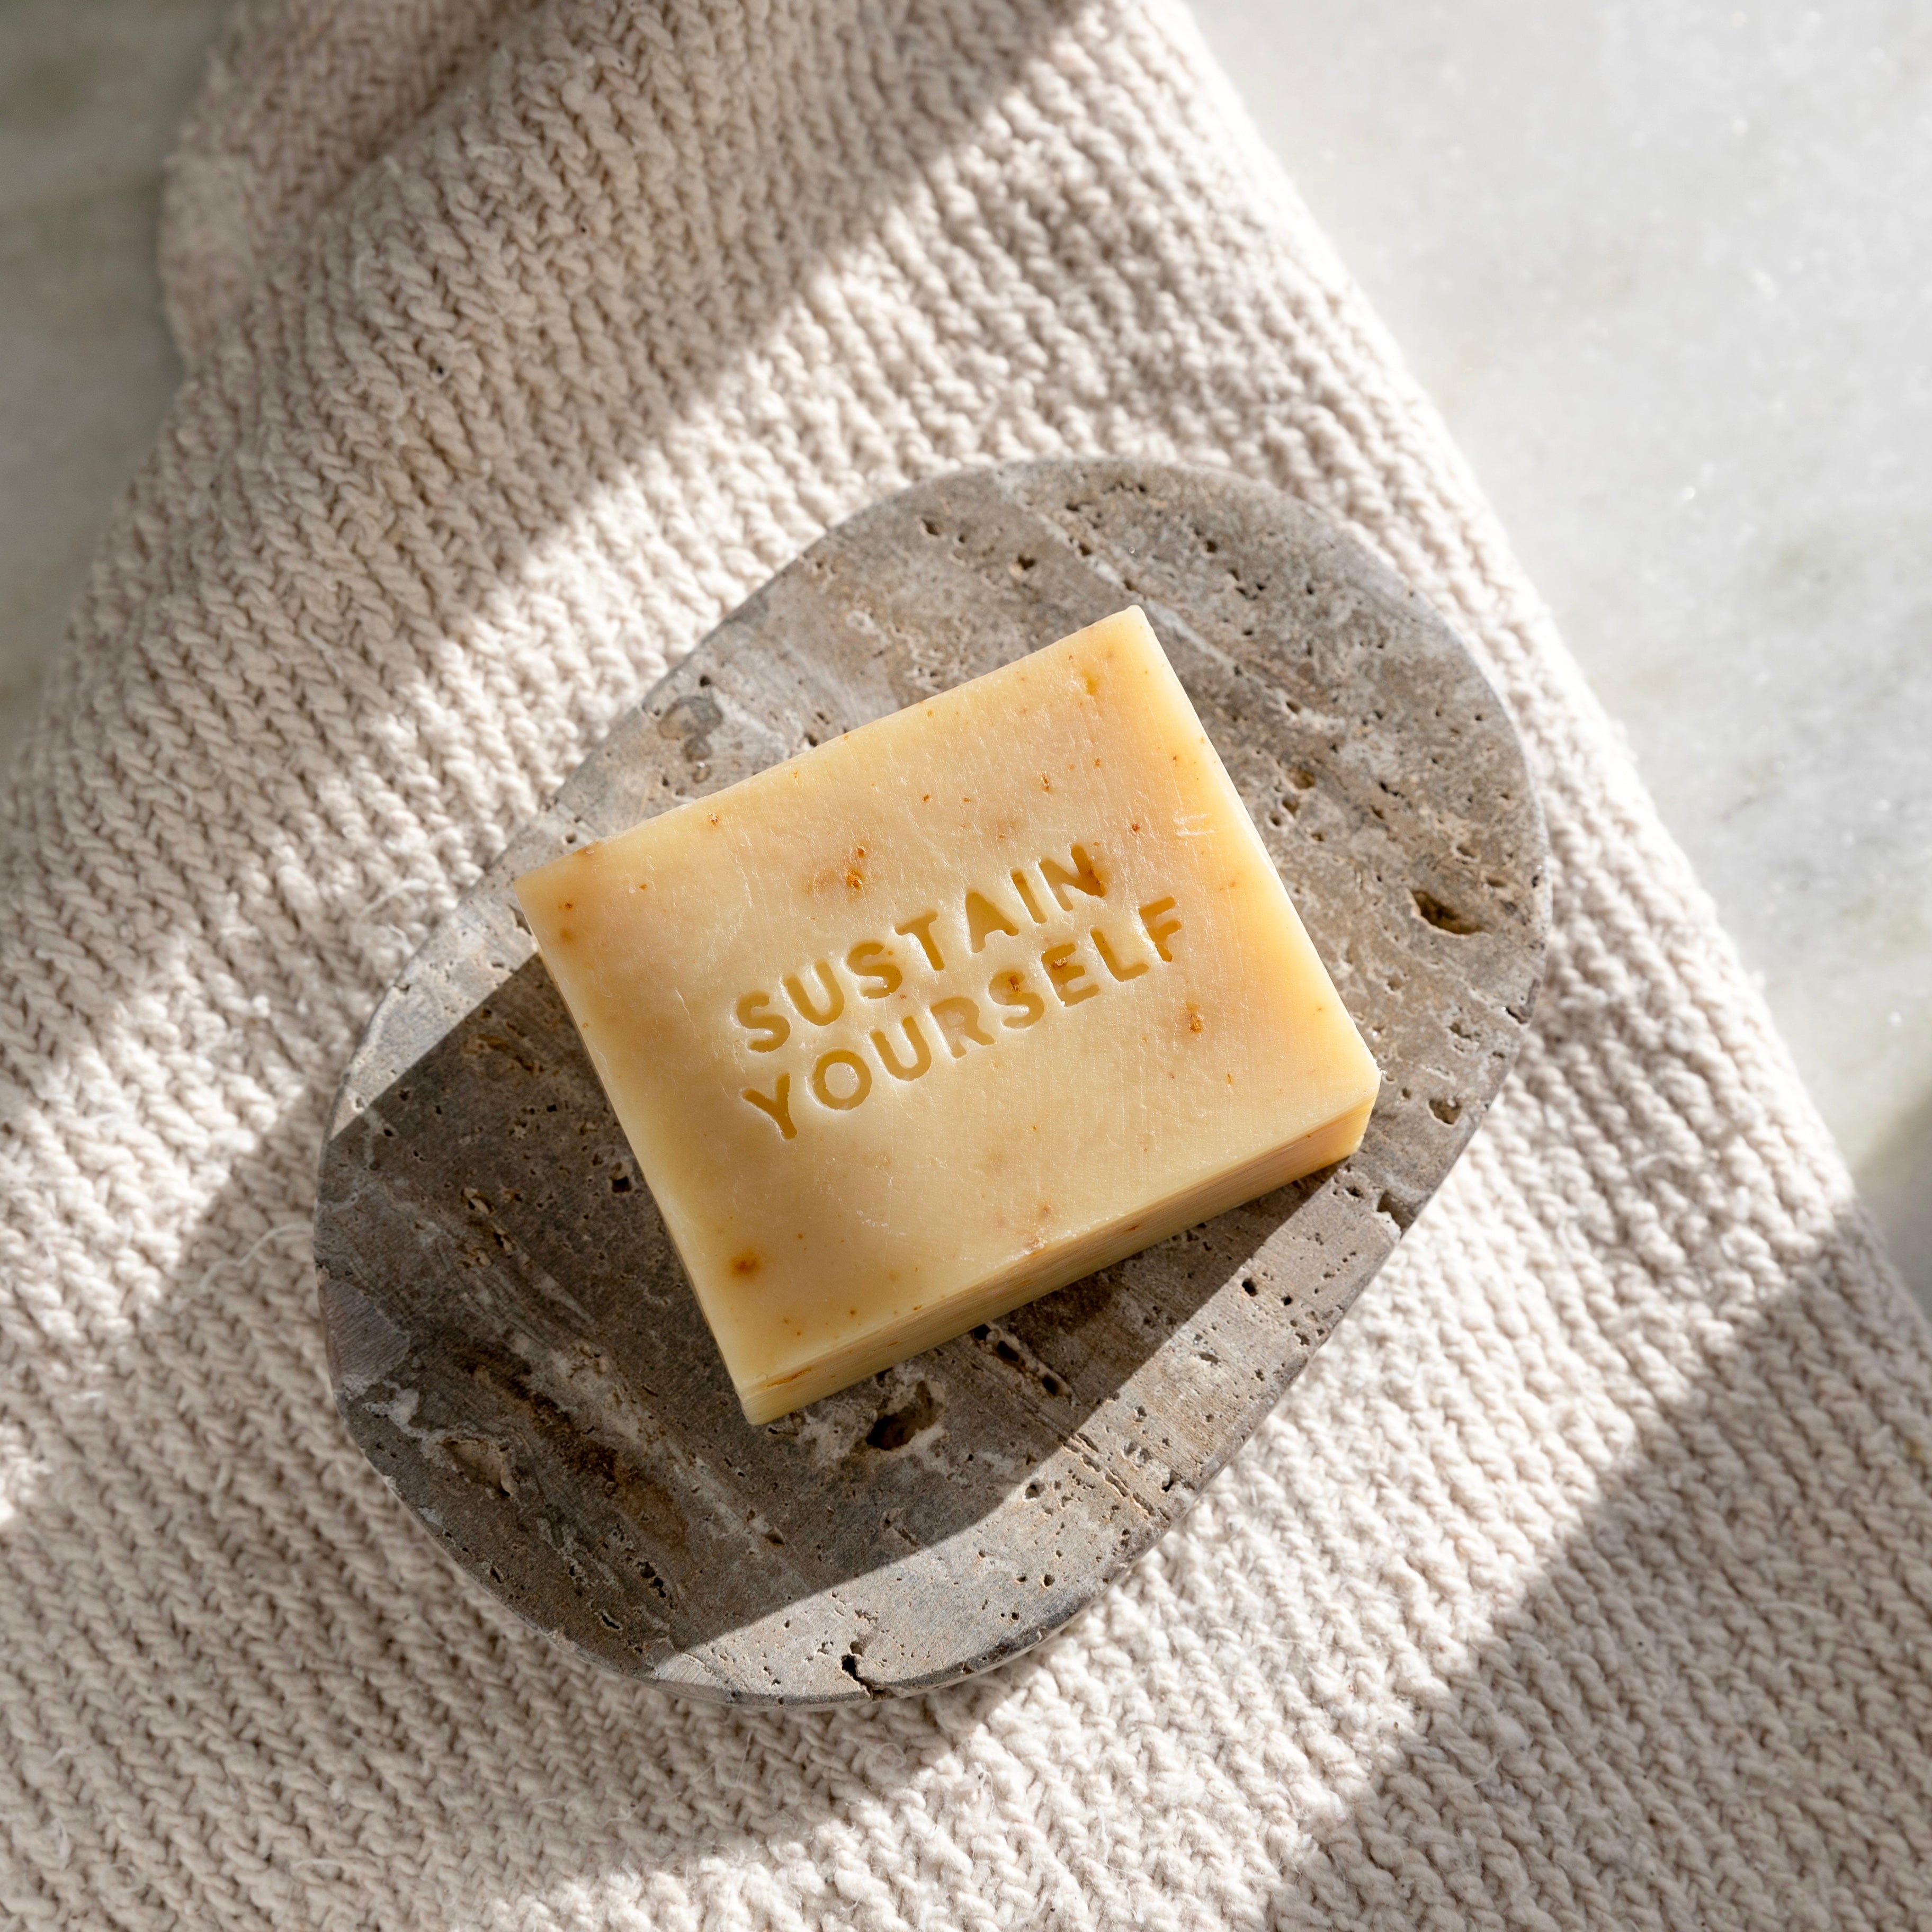 Tips For Making Your Bar Soap Last Longer – Sustain Yourself